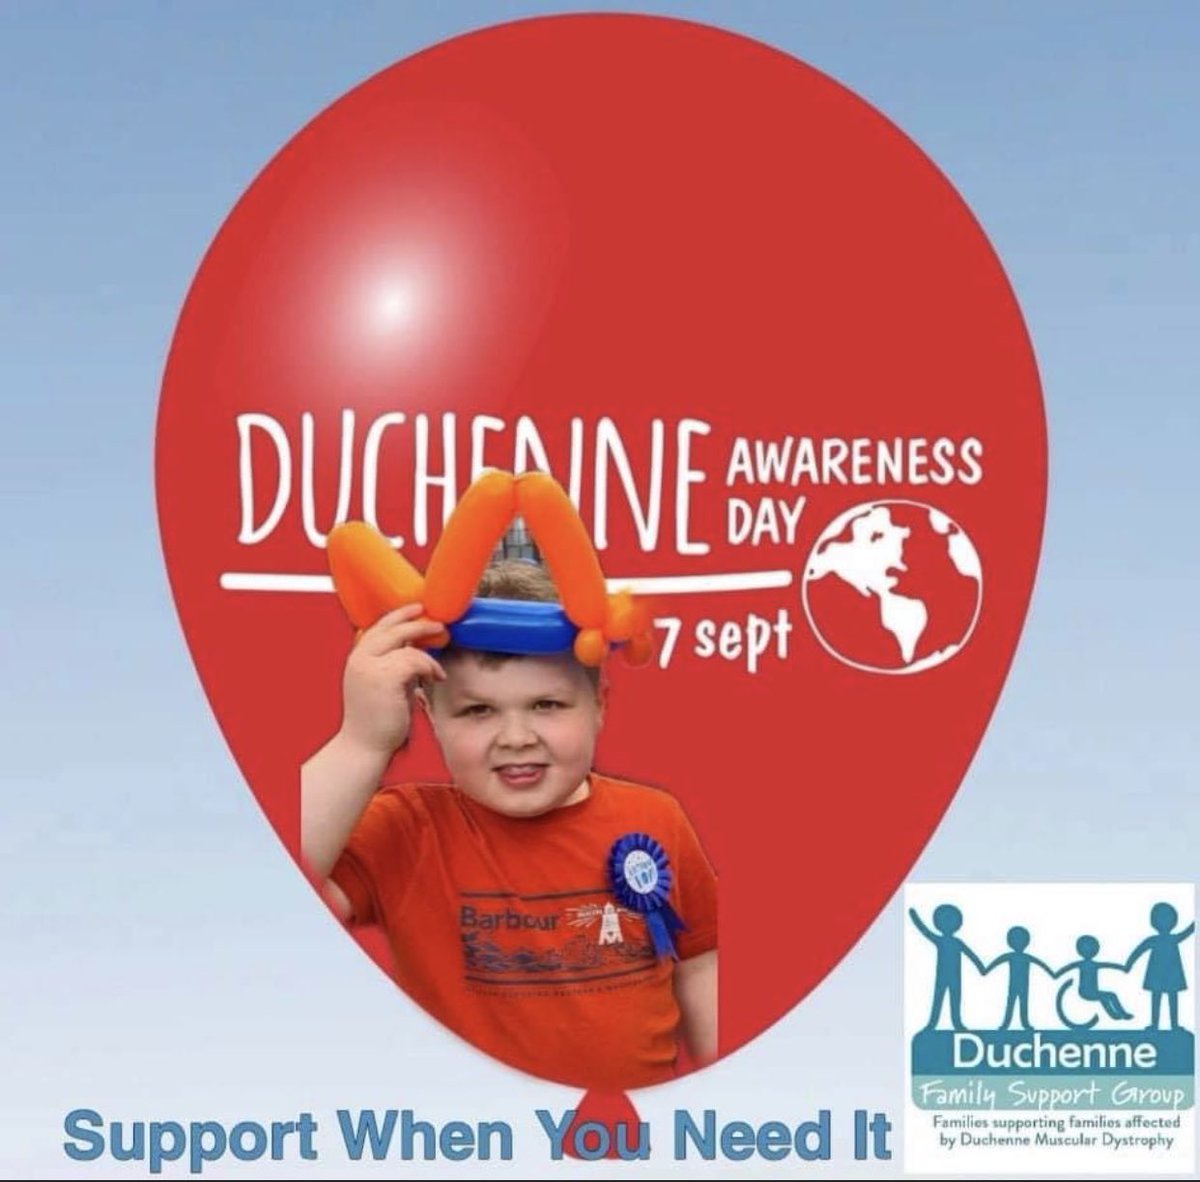 Duchenne awareness day is one week today. It’s on 7th of 9th to represent the 79 exons of the dystrophin gene! Can you tell one person a day about Duchenne for the next week? #awarenessequalsfunding #duchenneawareness